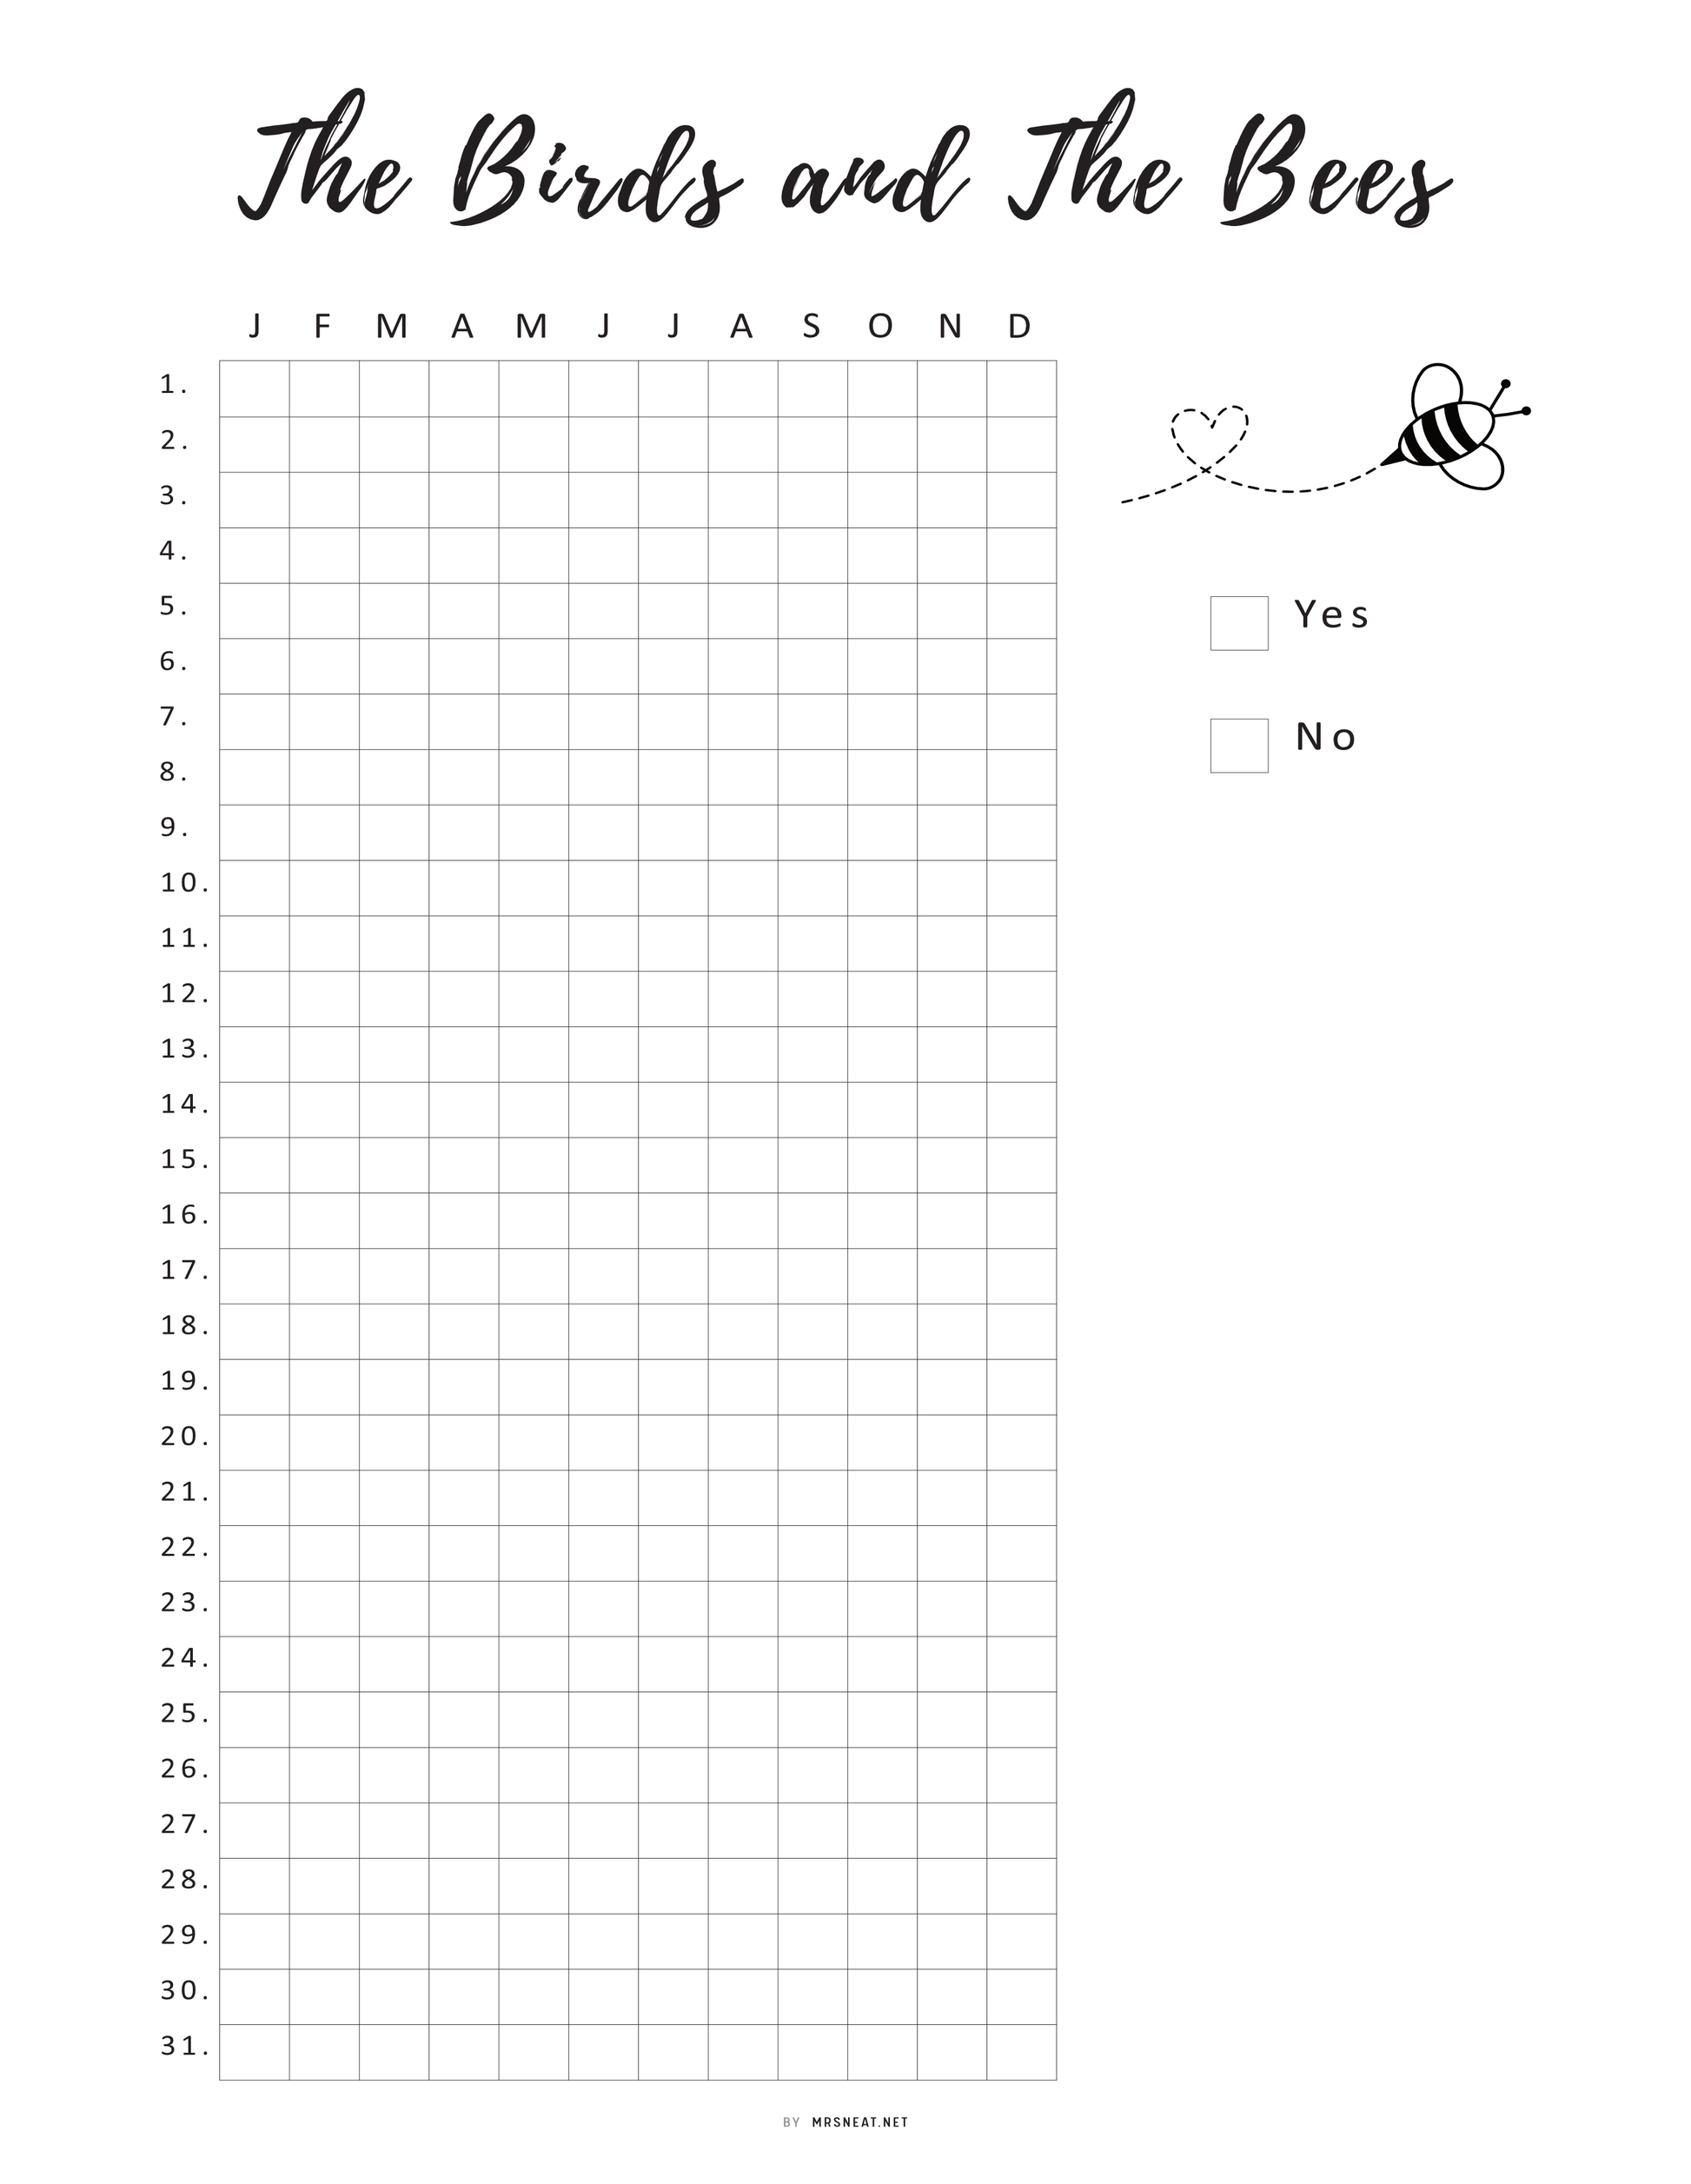 Intimacy Tracker Template Printable, Sex Tracker, Intimacy Tracker, The Birds and The Bees Tracker Template, Sexual Health Tracker, Love Tracker, PDF, A4, A5, Letter, Half Letter, 2 versions